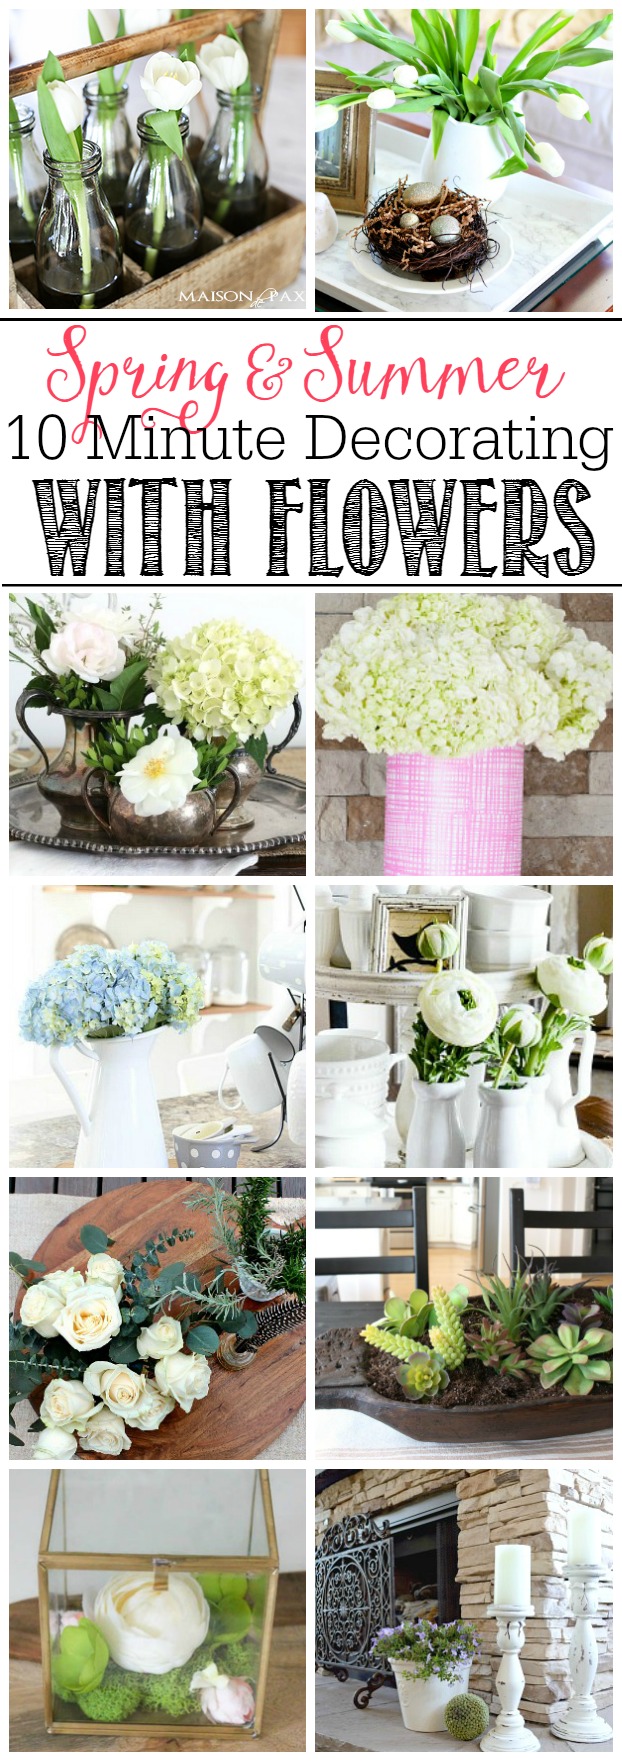 Quick and easy ways to decorate your home for spring or summer using flowers. 10 minutes is all you need!